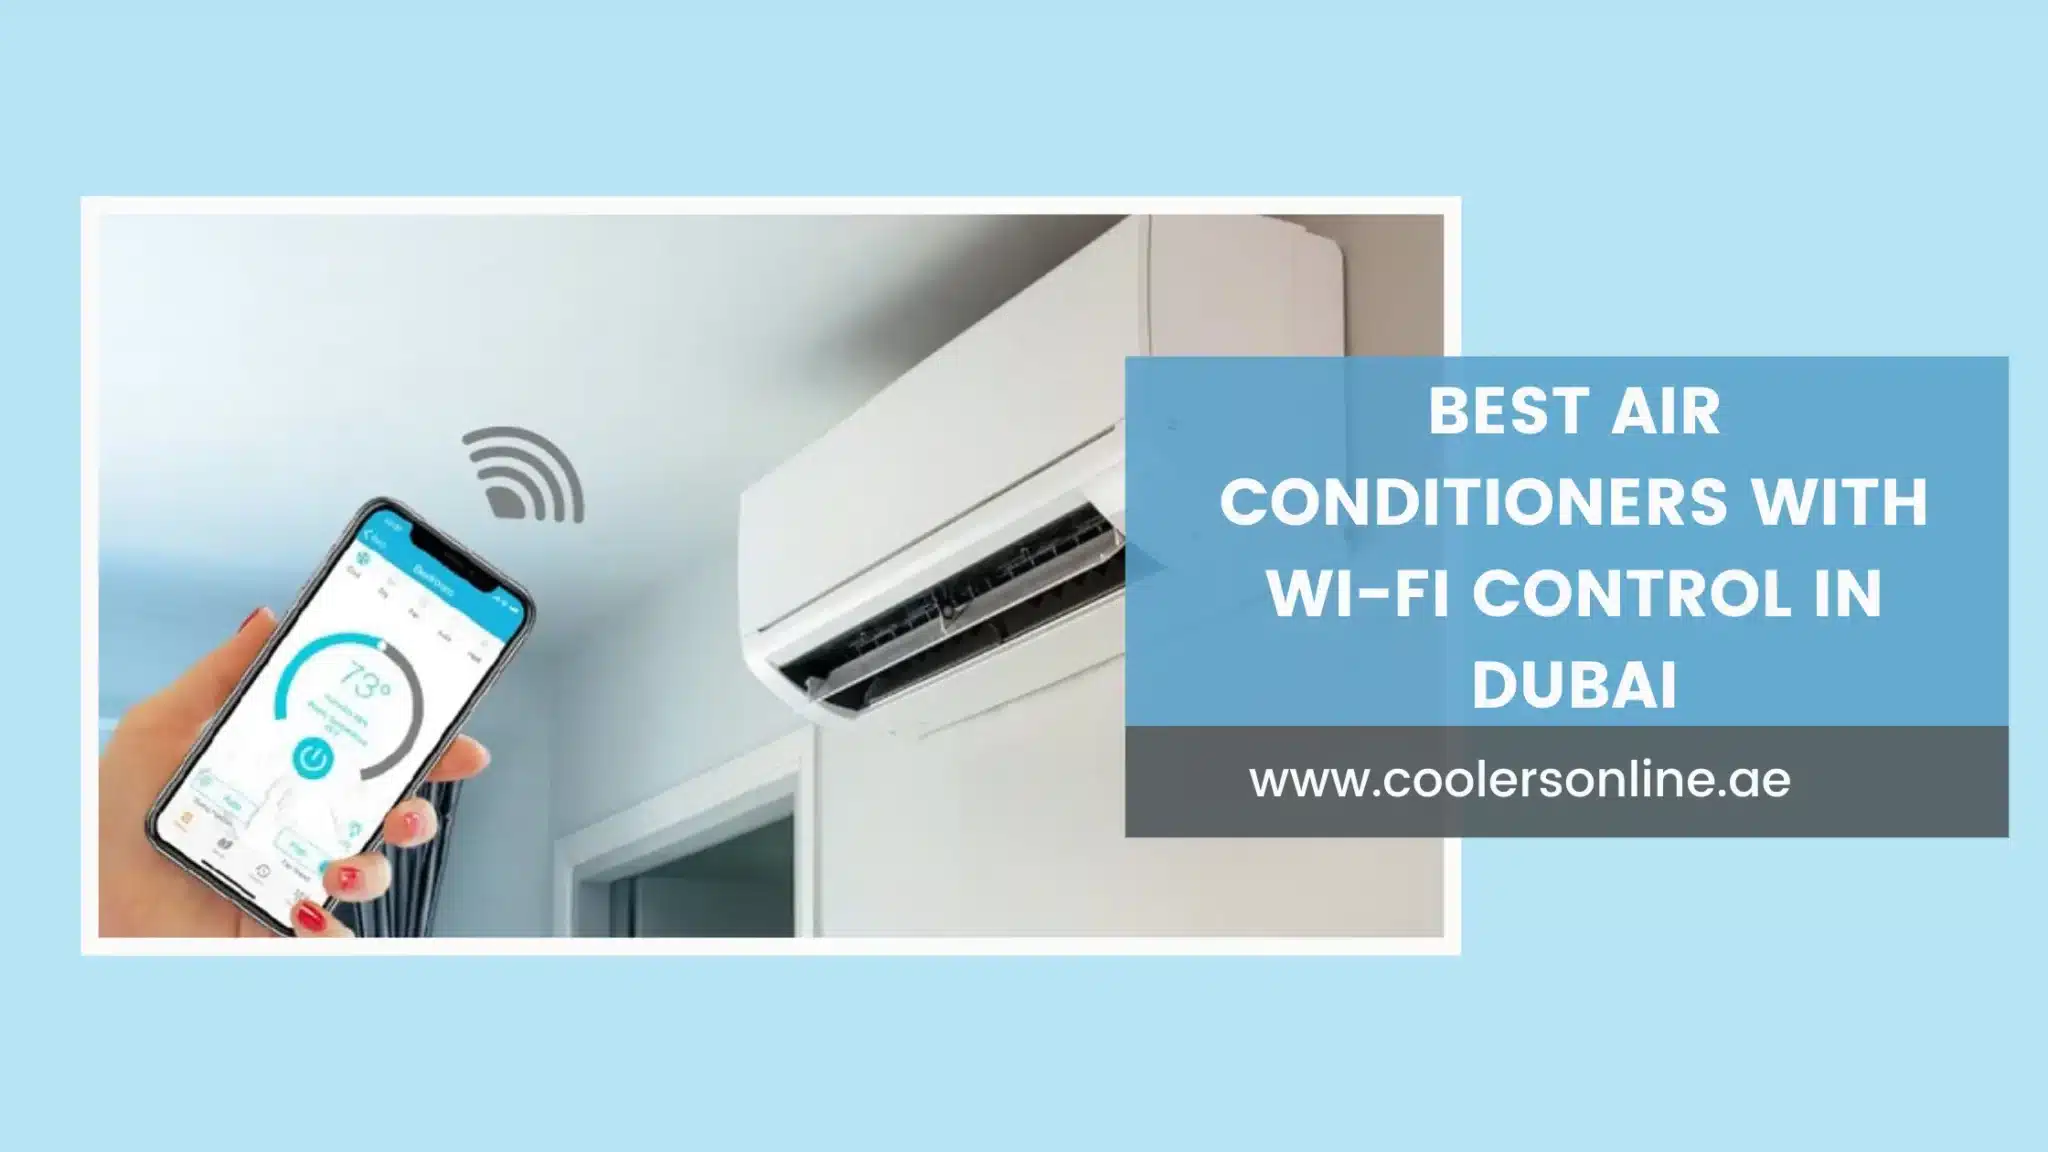 Best Air Conditioners with Wi-Fi Control in Dubai